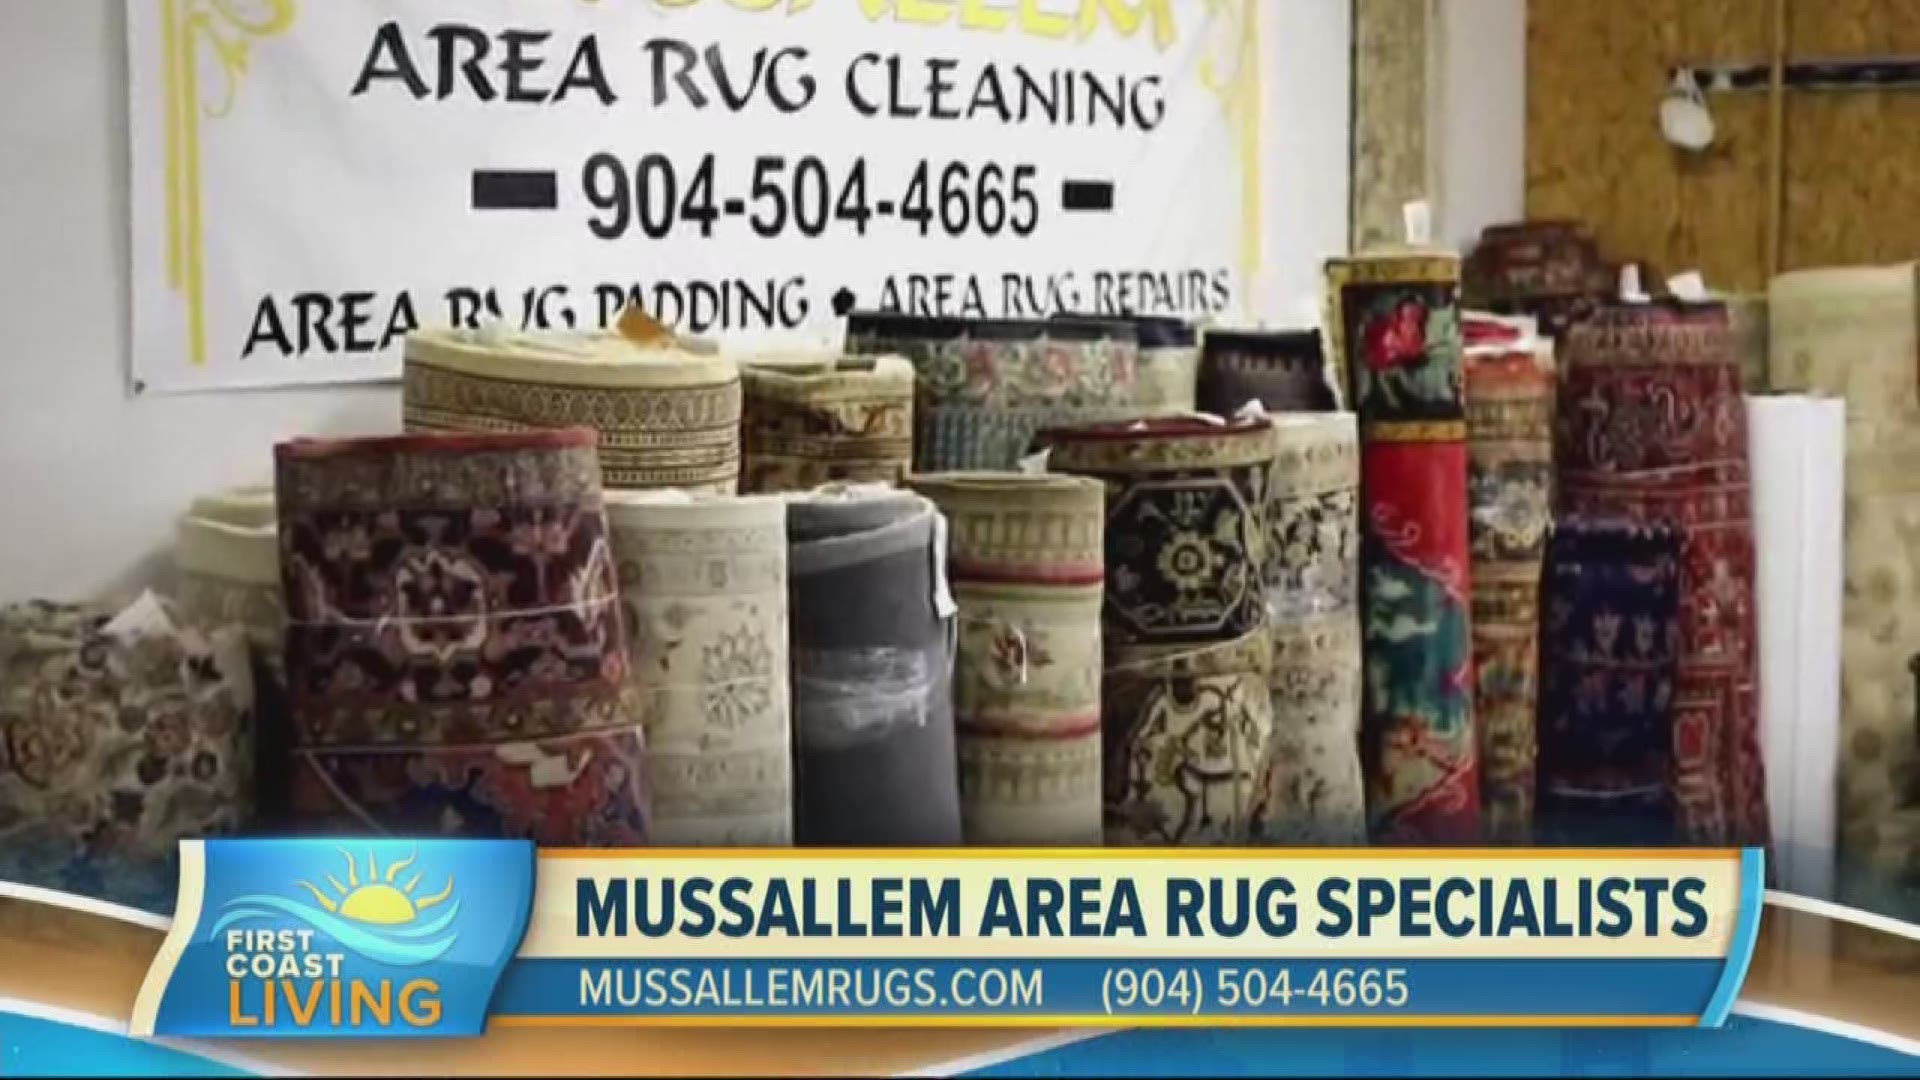 They have the equipment and the skills to keep your rugs vibrant and in great shape!